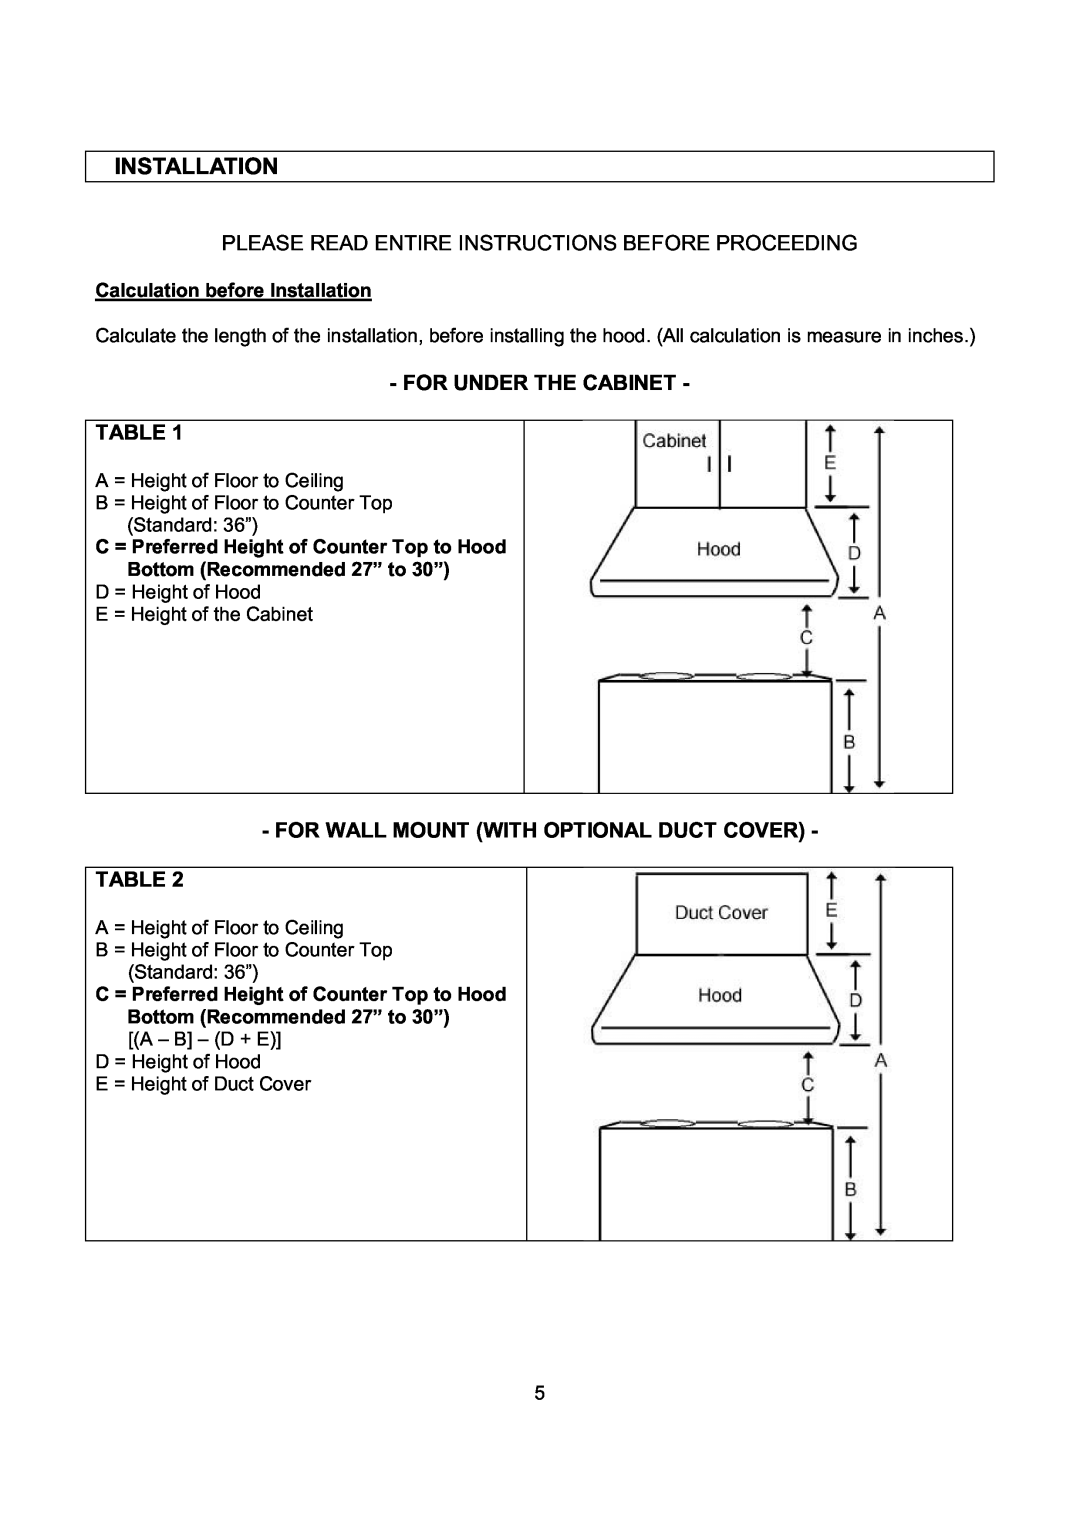 Kobe Range Hoods CH0336SQB Installation, Please Read Entire Instructions Before Proceeding, For Under The Cabinet 